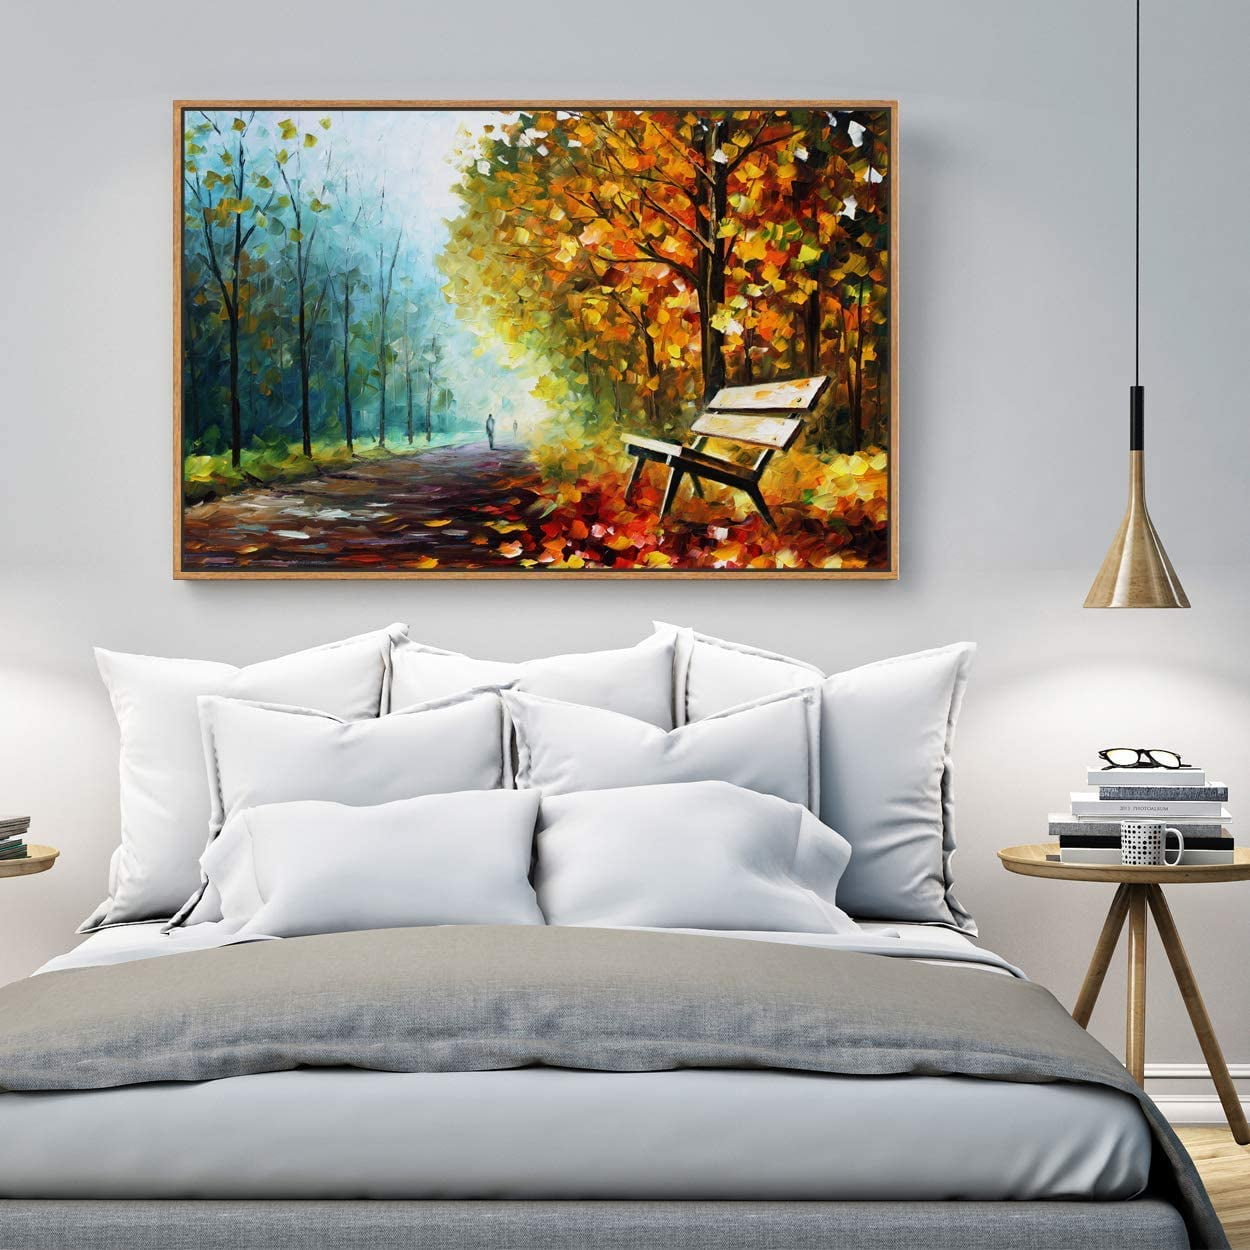 wall26 Floating Framed Canvas Wall Art for Living Room Bedroom Scenery 